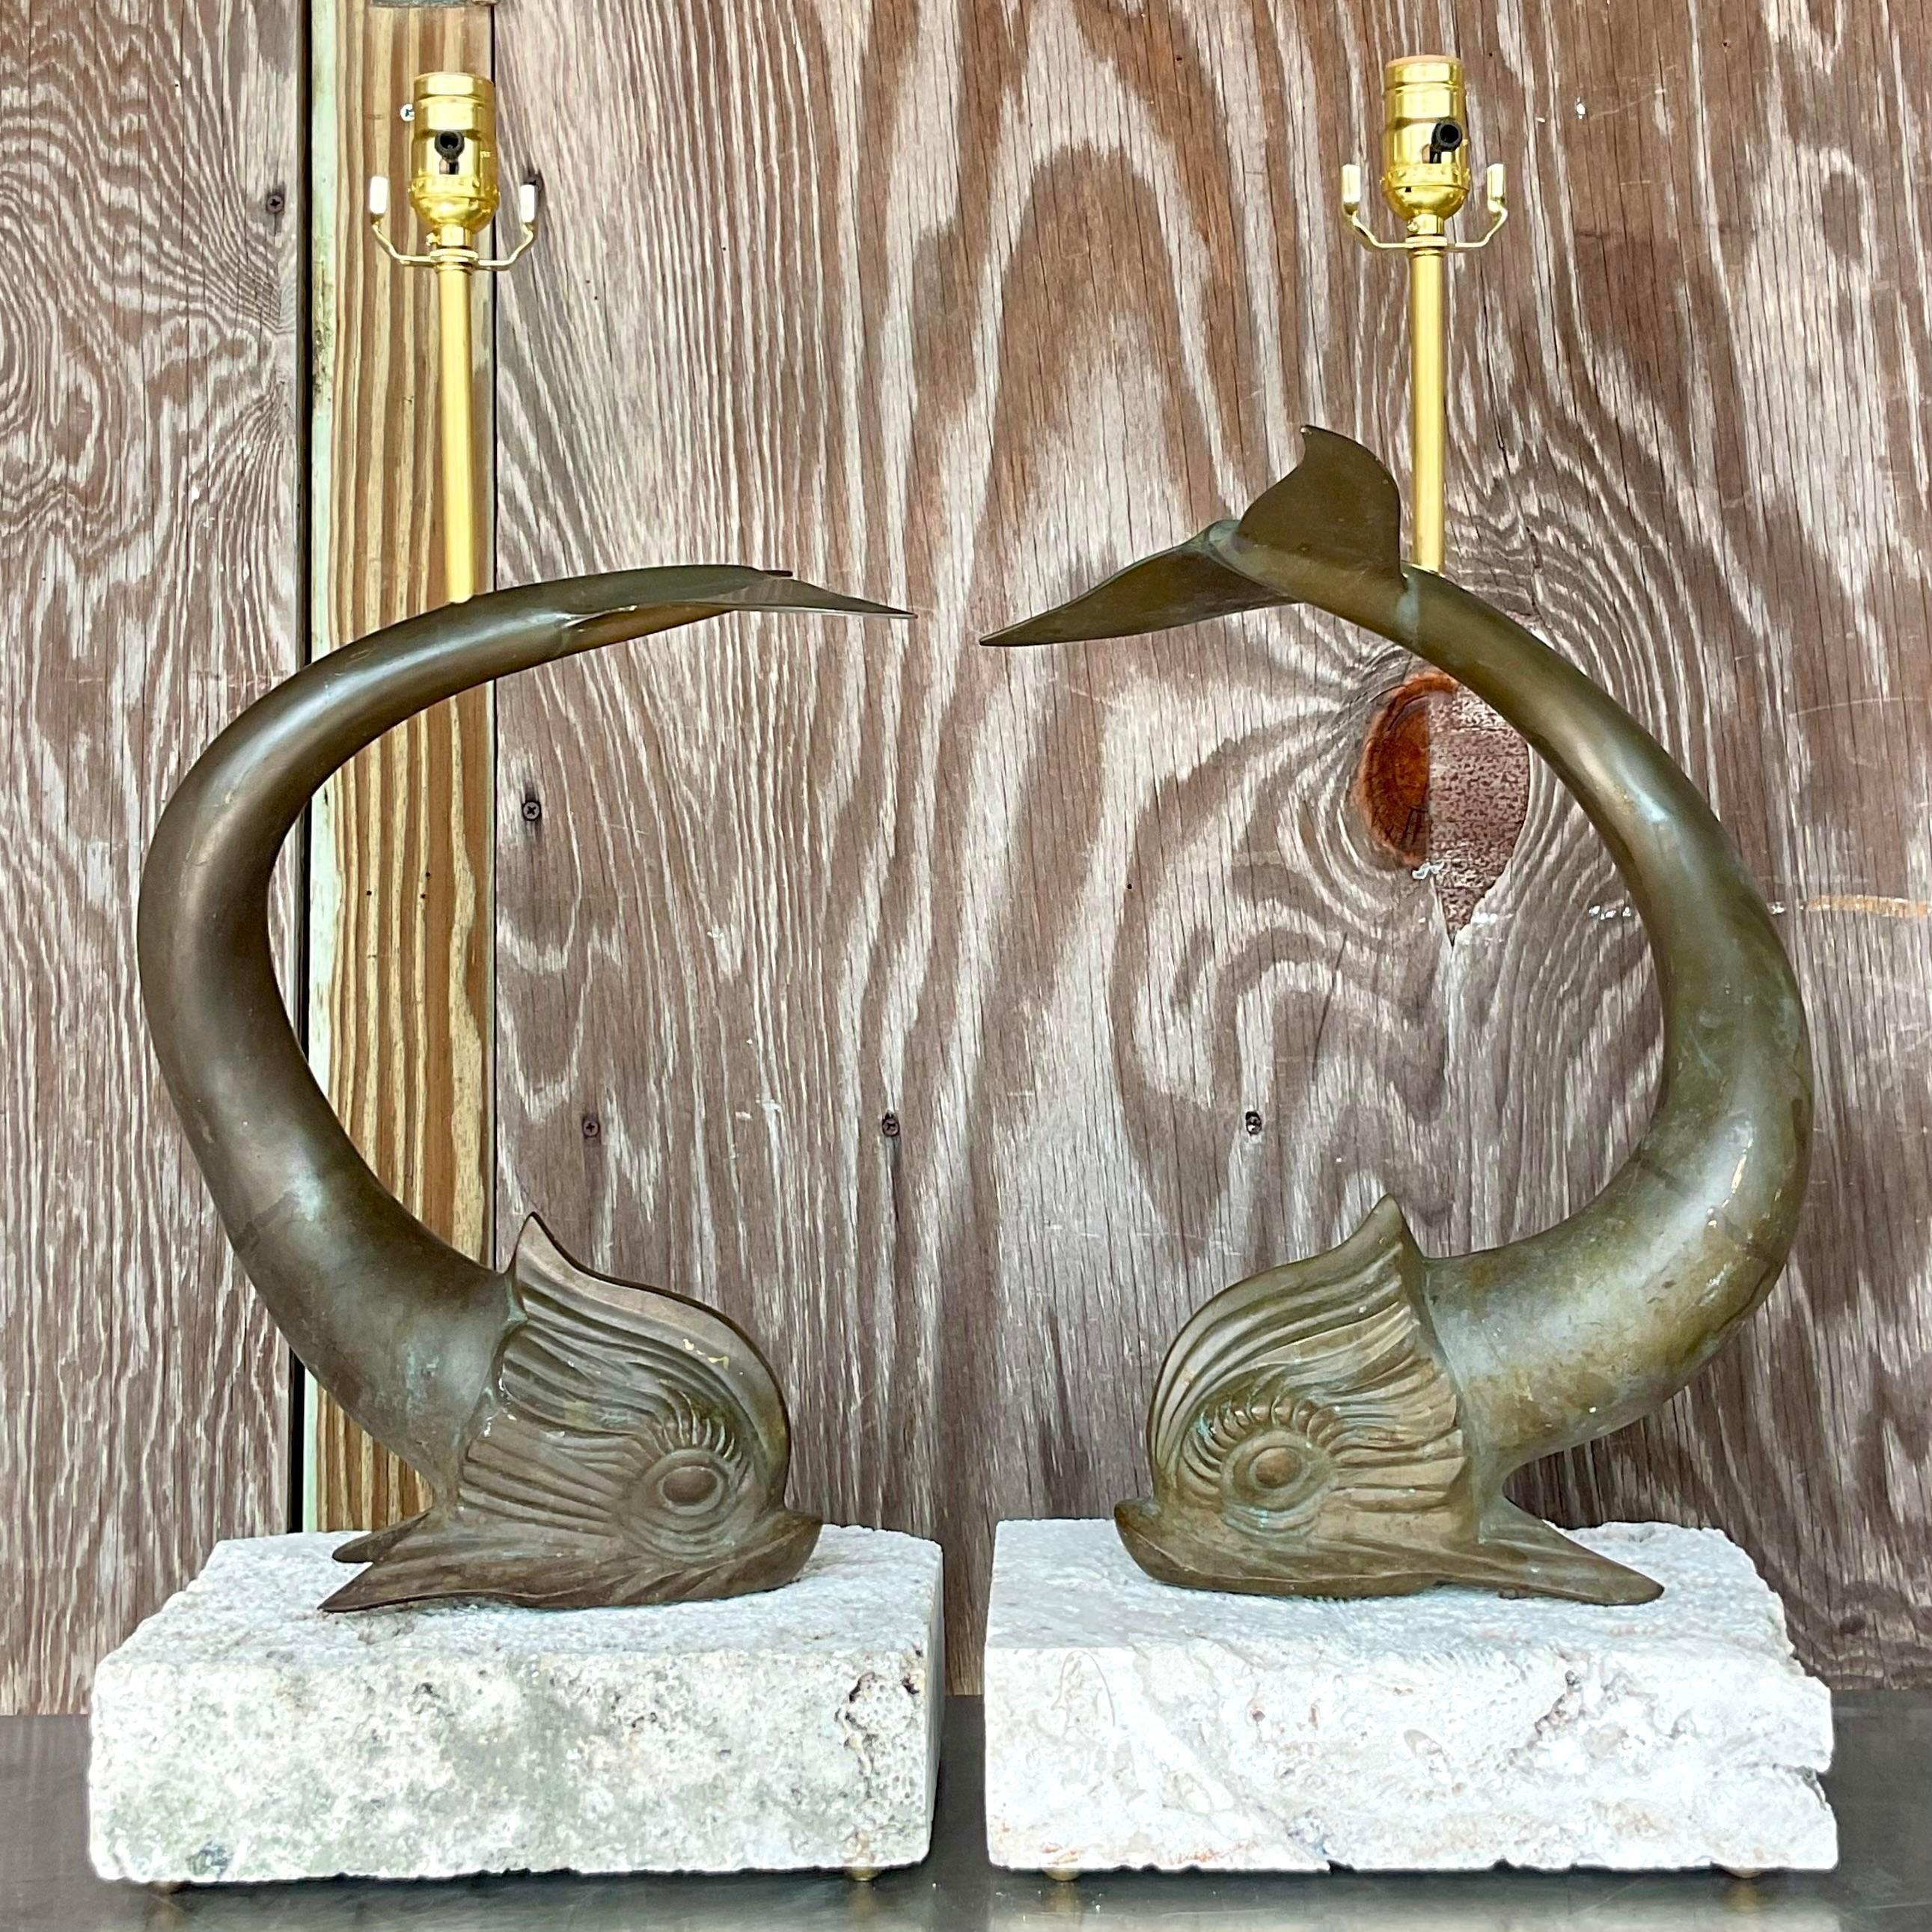 A remarkable pair of vintage Costal table lamps. A chic bronze Koi fish mounted on custom coquina block plinths. All new wiring and hardware. Acquired from a Palm Beach estate.